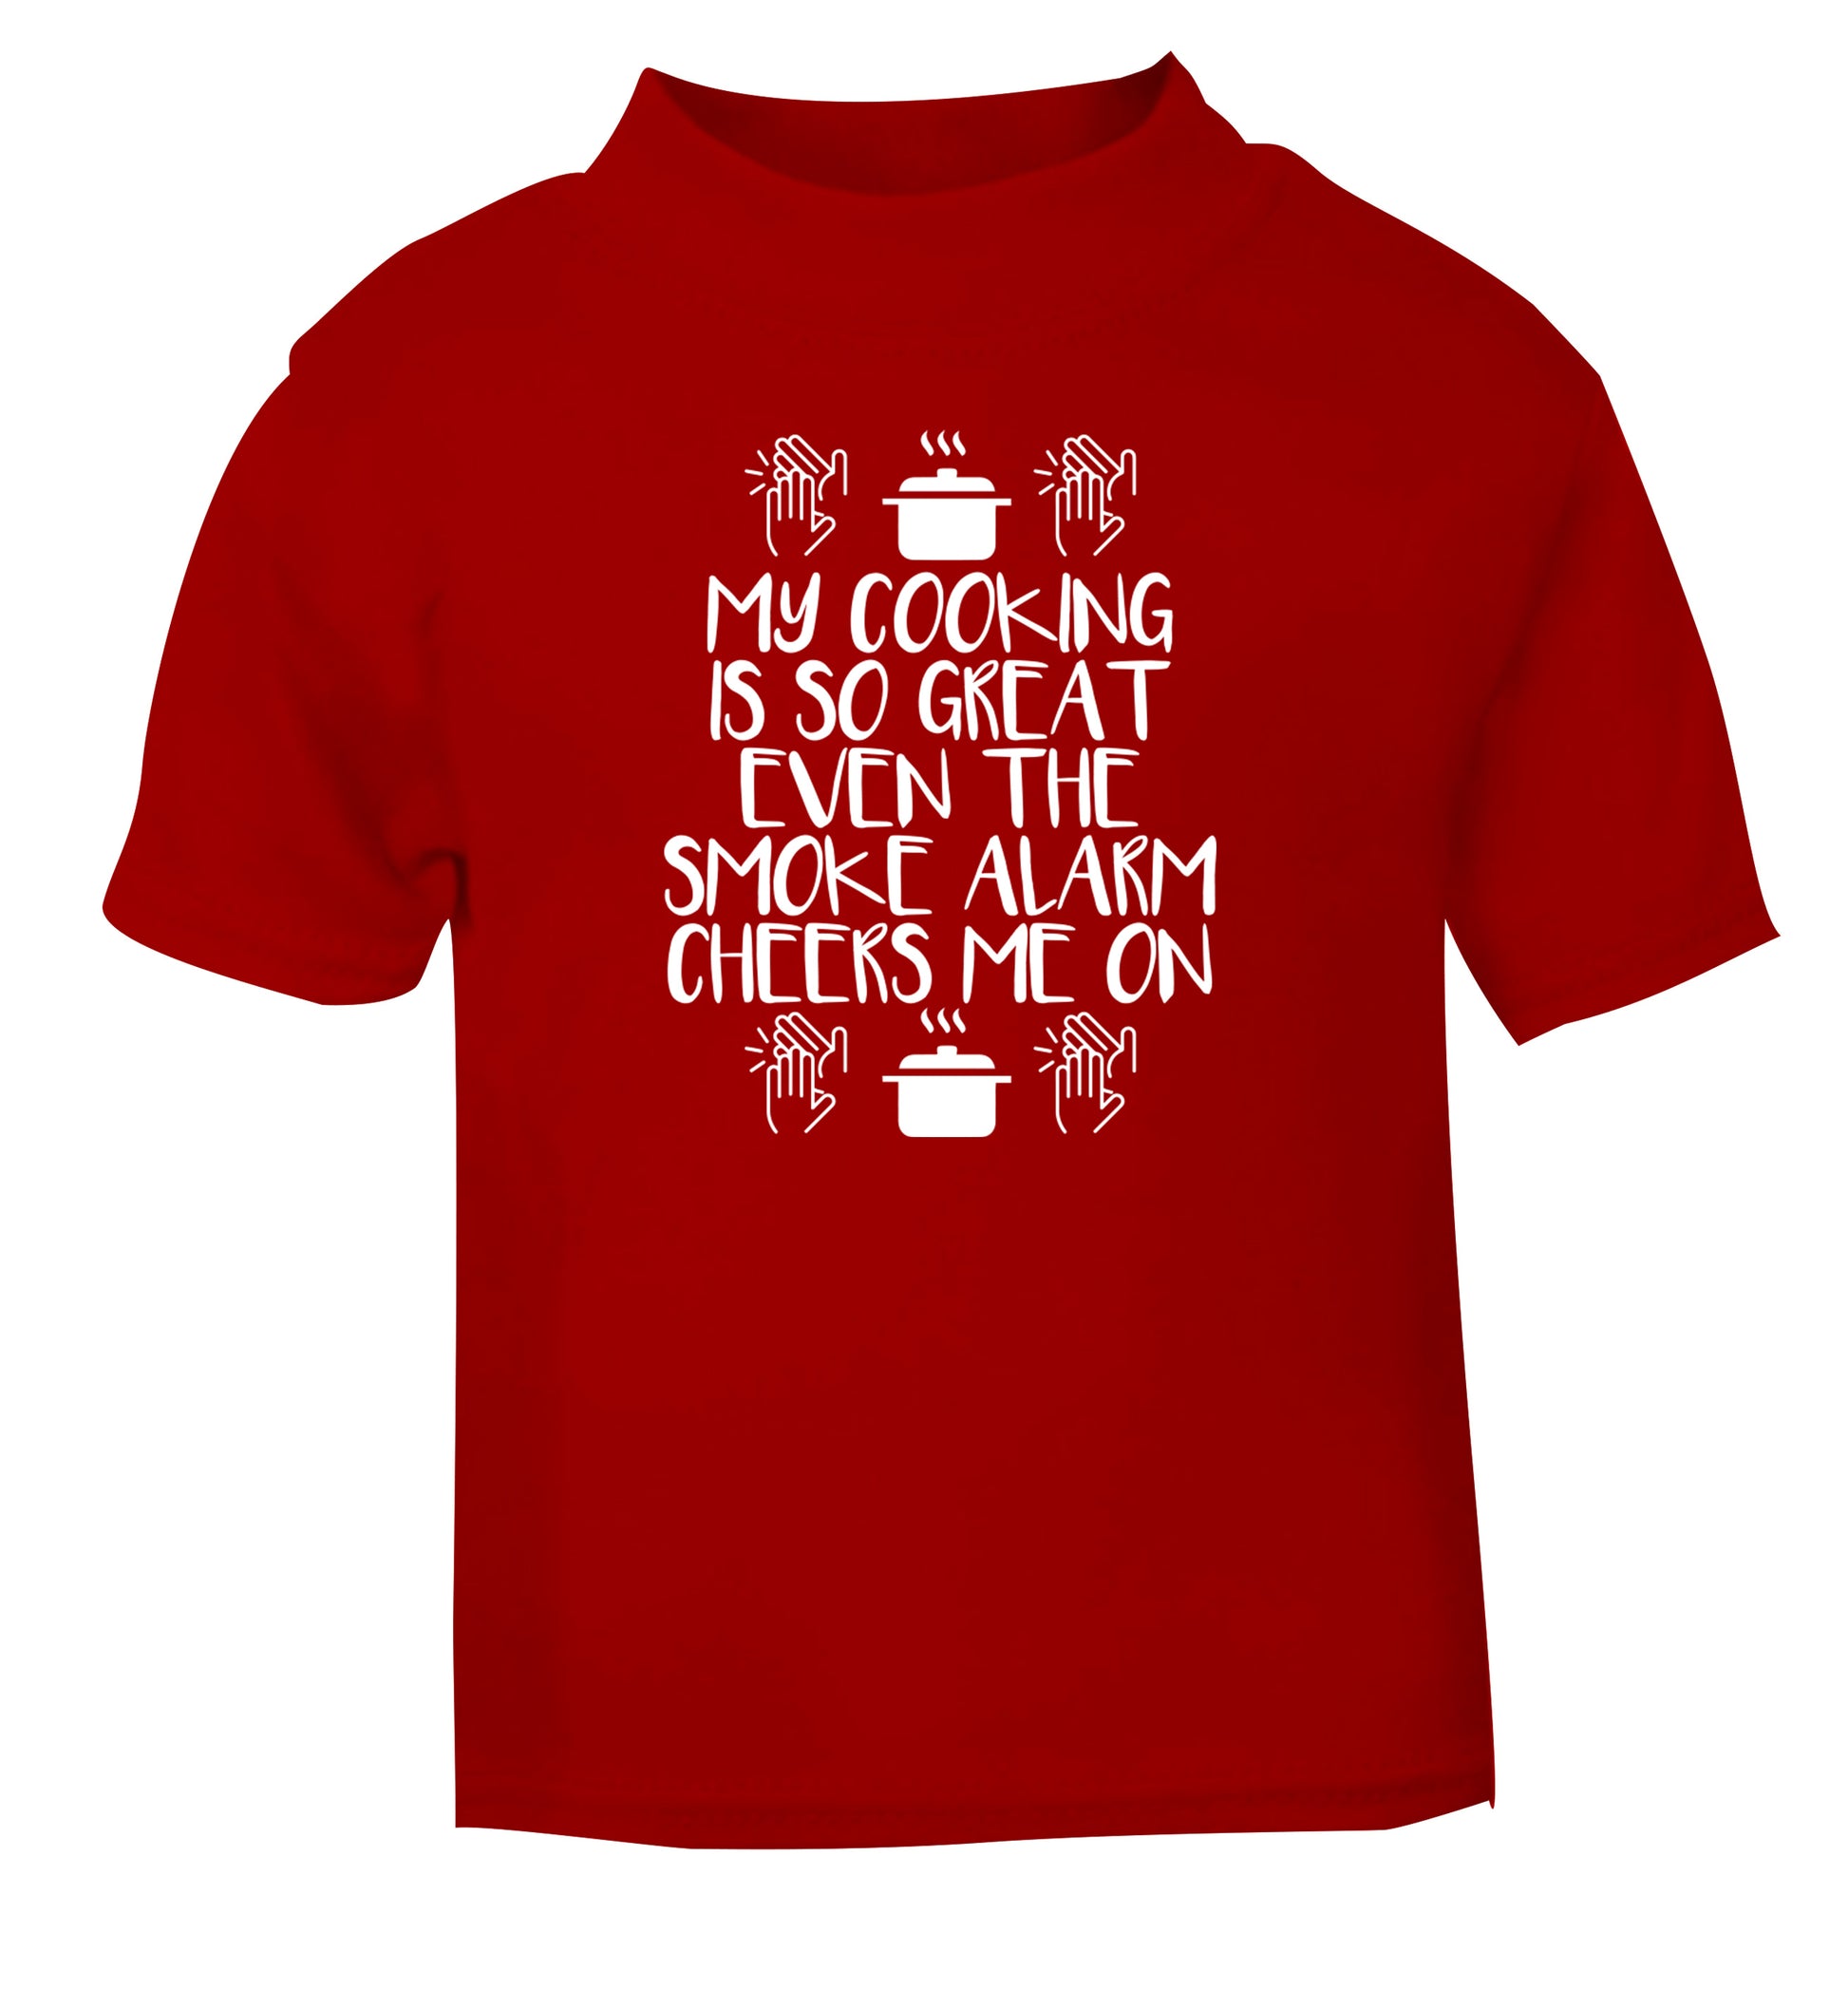 My cooking is so great even the smoke alarm cheers me on! red Baby Toddler Tshirt 2 Years